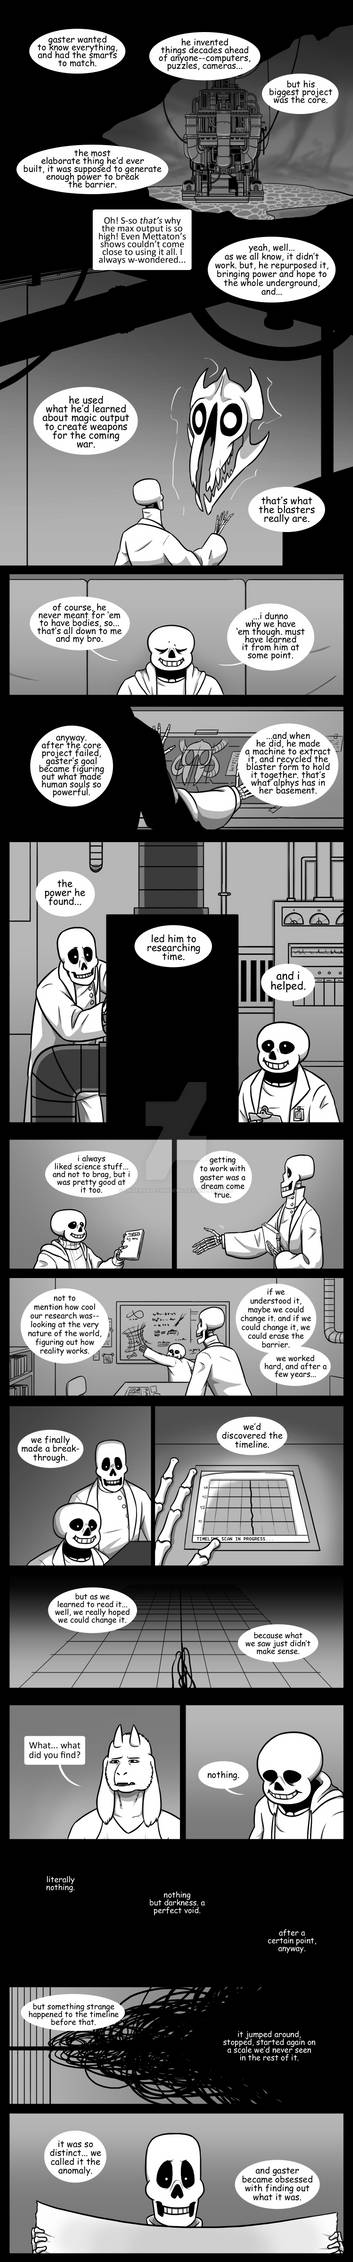 Unexpected Guests: Chapter 7, Part 26 by UndertaleThingems on DeviantArt